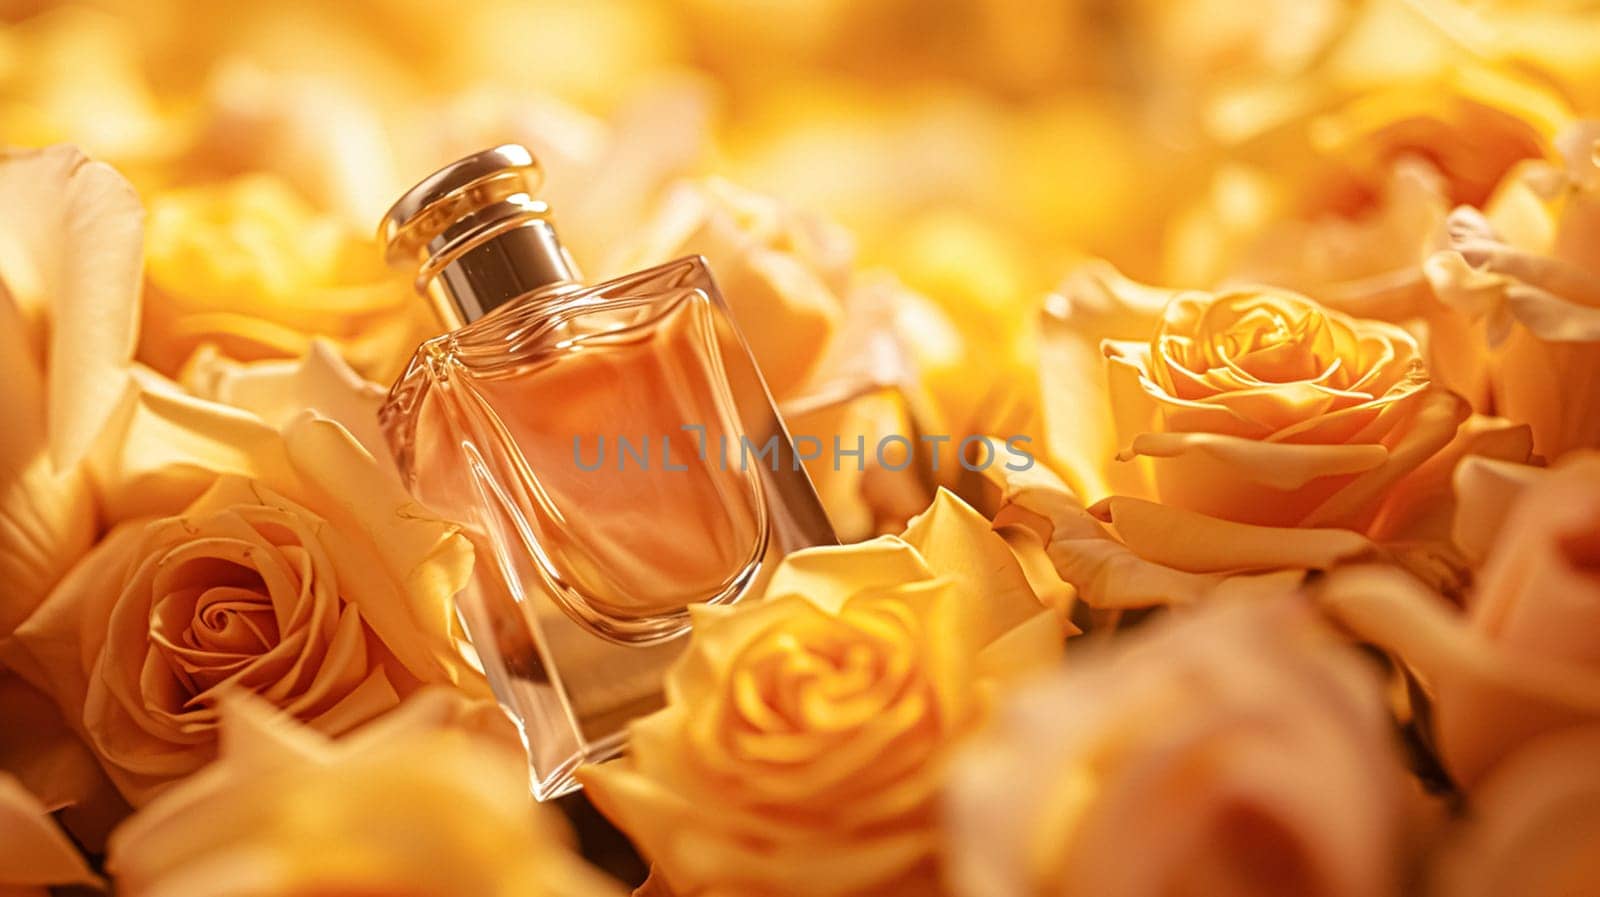 Perfume bottle in flowers, fragrance on blooming background, floral scent and cosmetic product by Anneleven